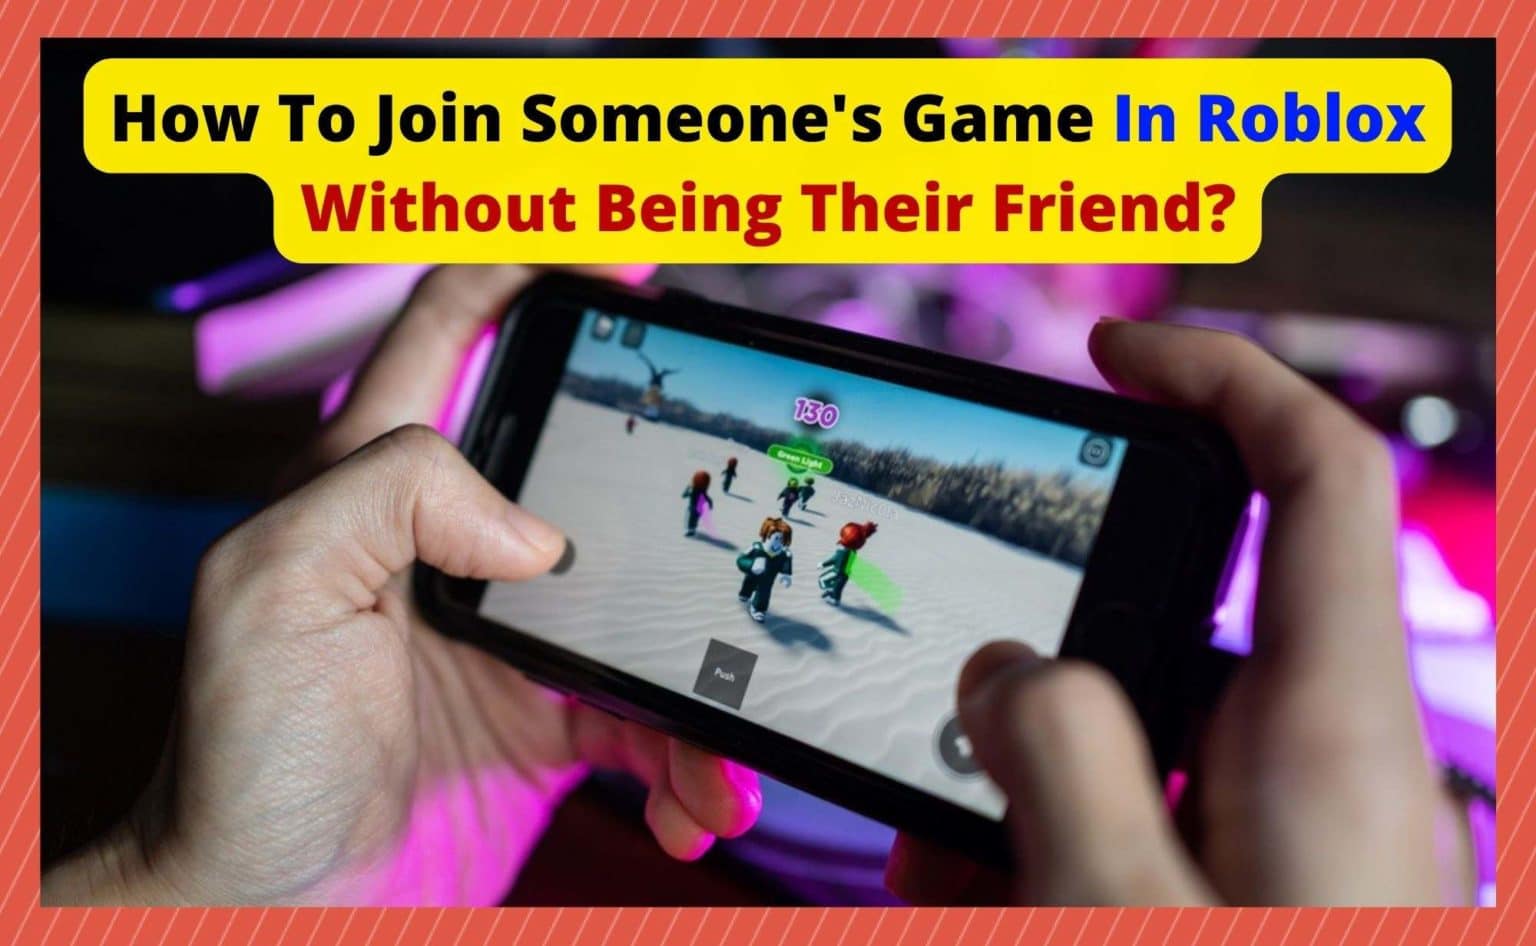 How To Join Someone's Game In Roblox Without Being Their Friend? West